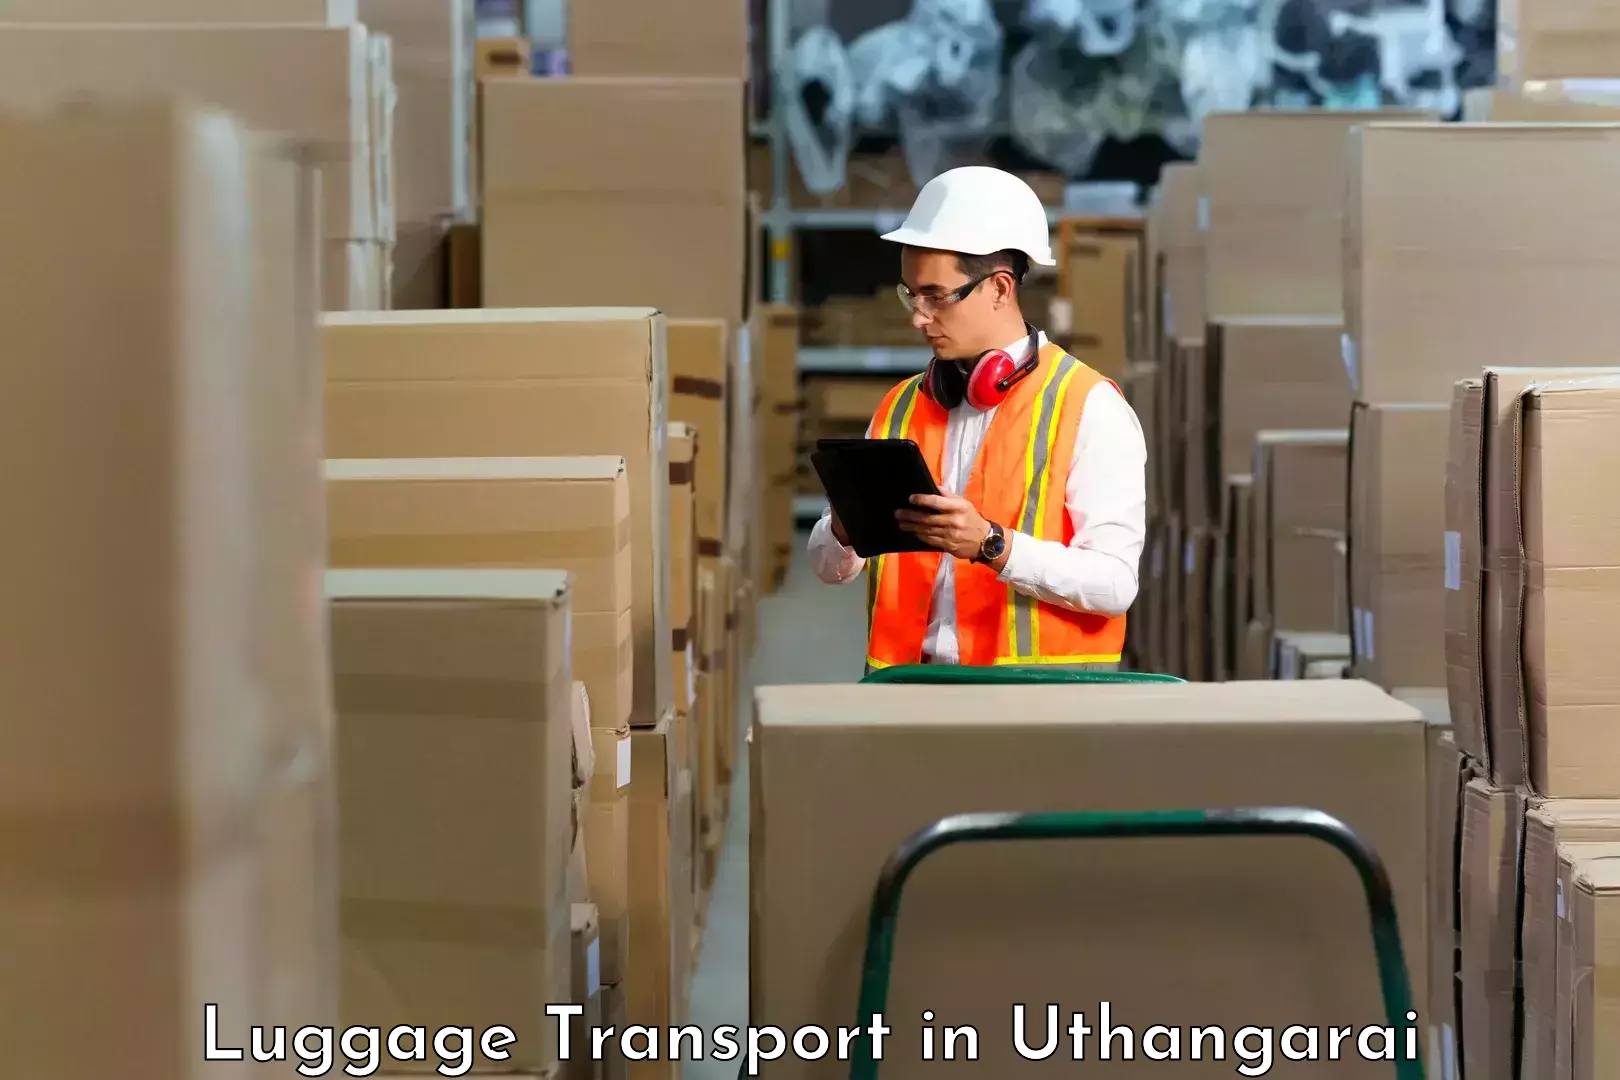 Luggage delivery providers in Uthangarai